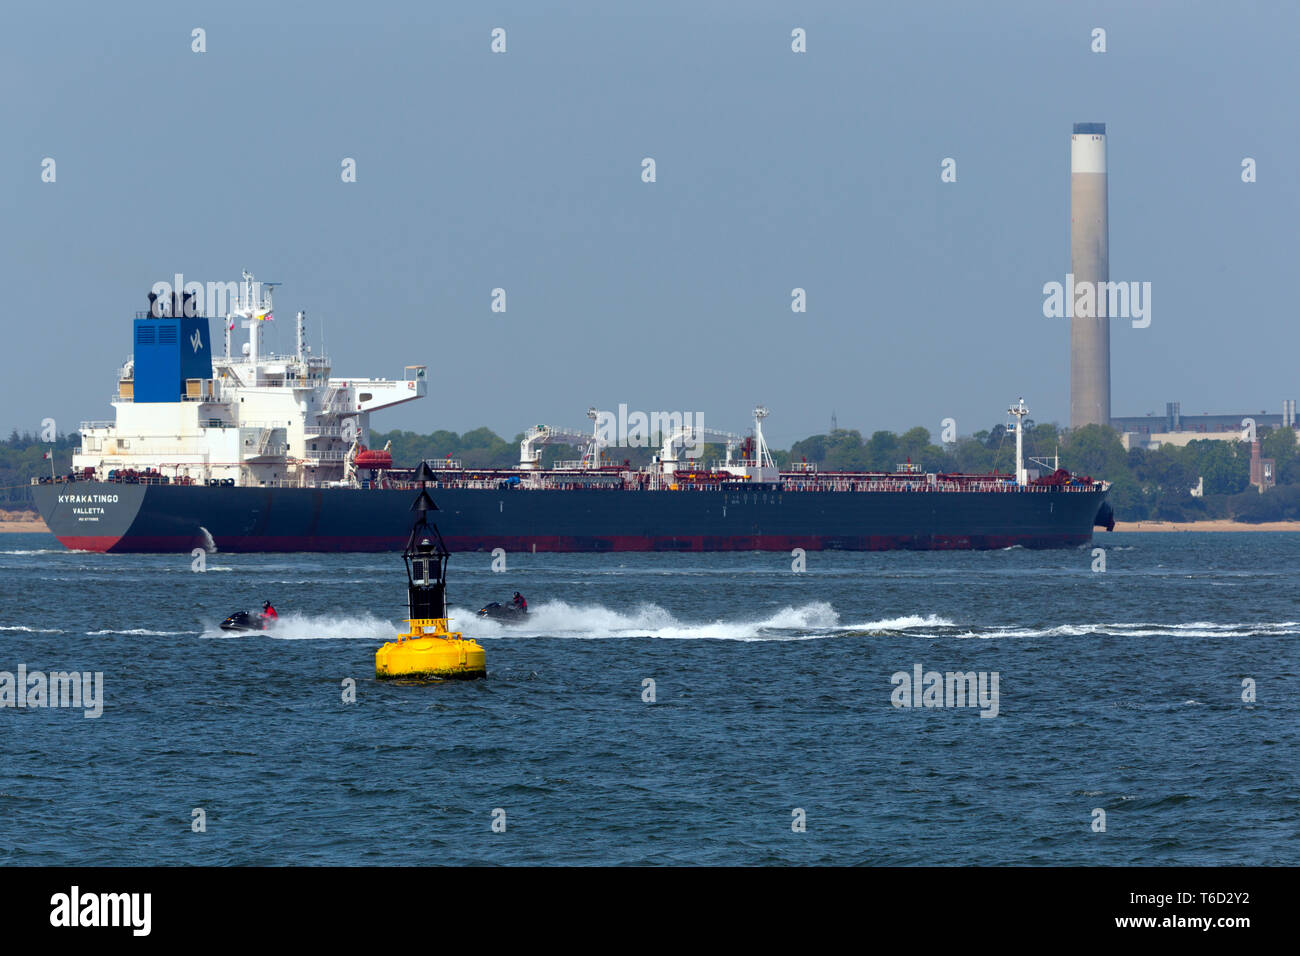 Kyrakatingo,Valletta,Voith,Schneider,power,system,propulsion,Chemical,Southampton,services,port,towing,Tanker,Oil,Refinery,Fawley,The Solent, Stock Photo